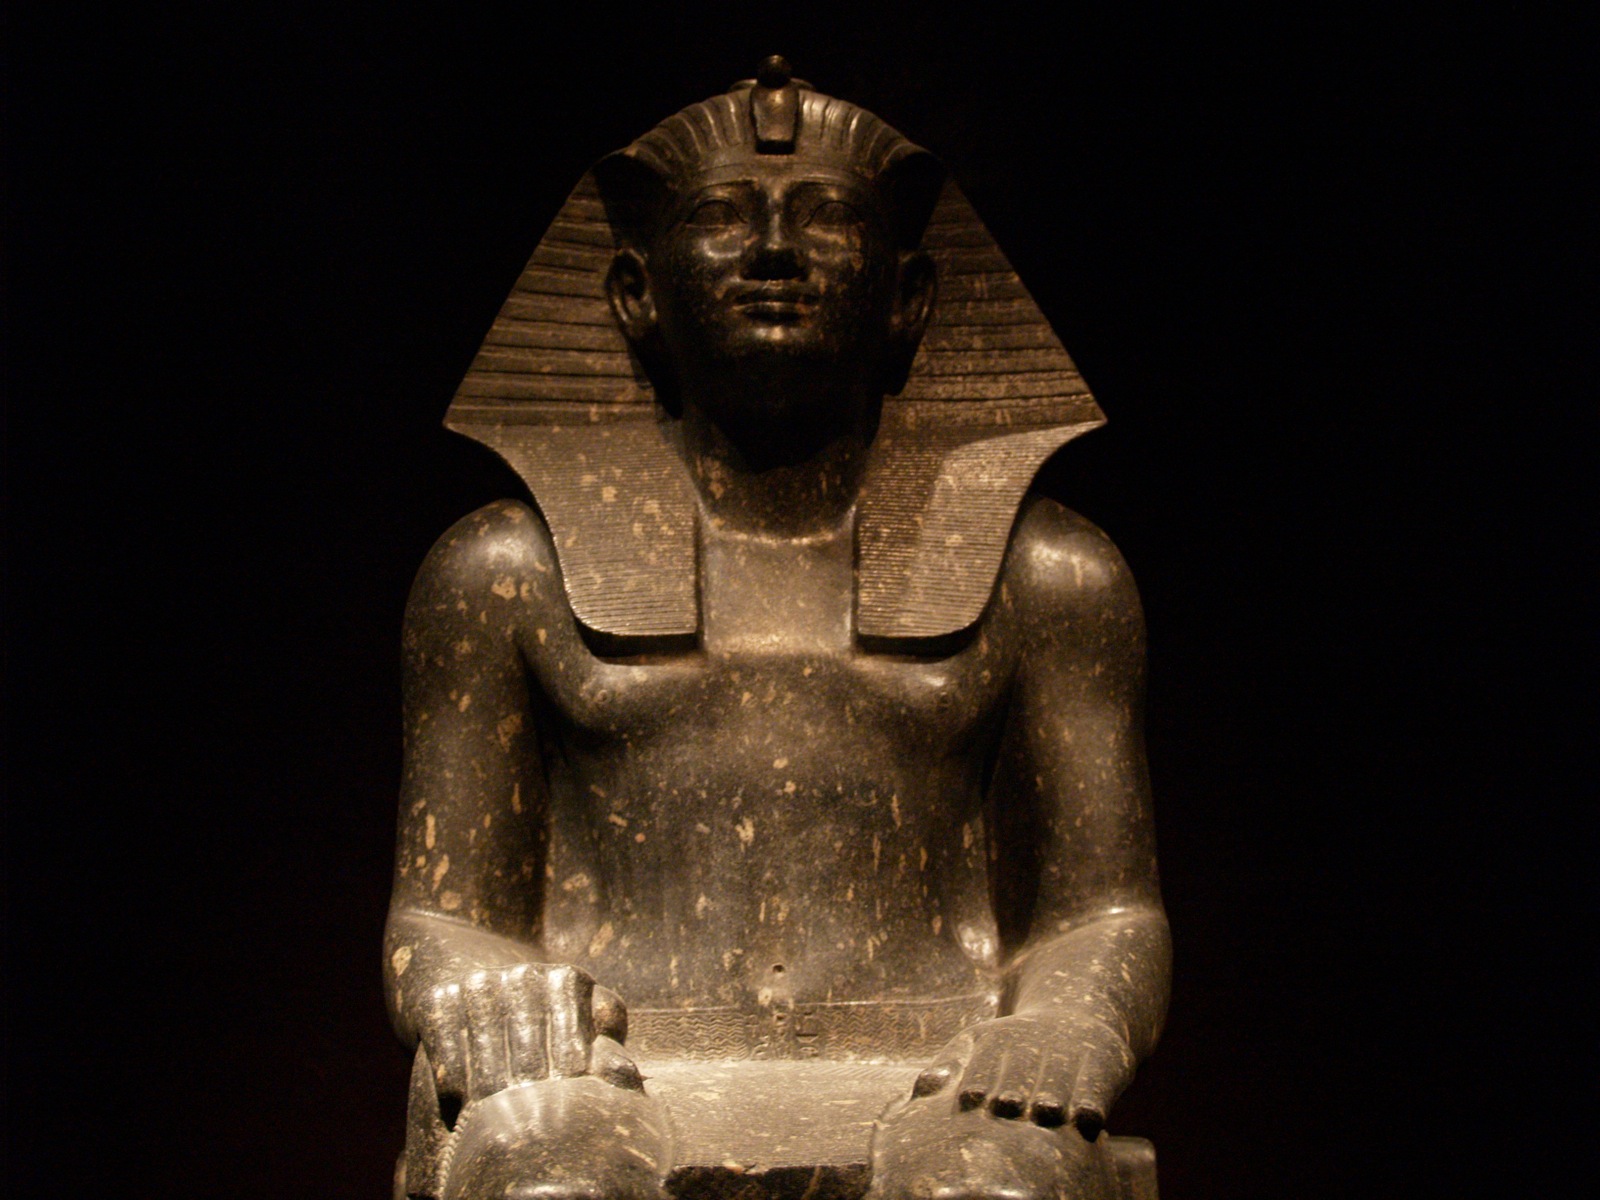 an ancient statue is shown against a dark background